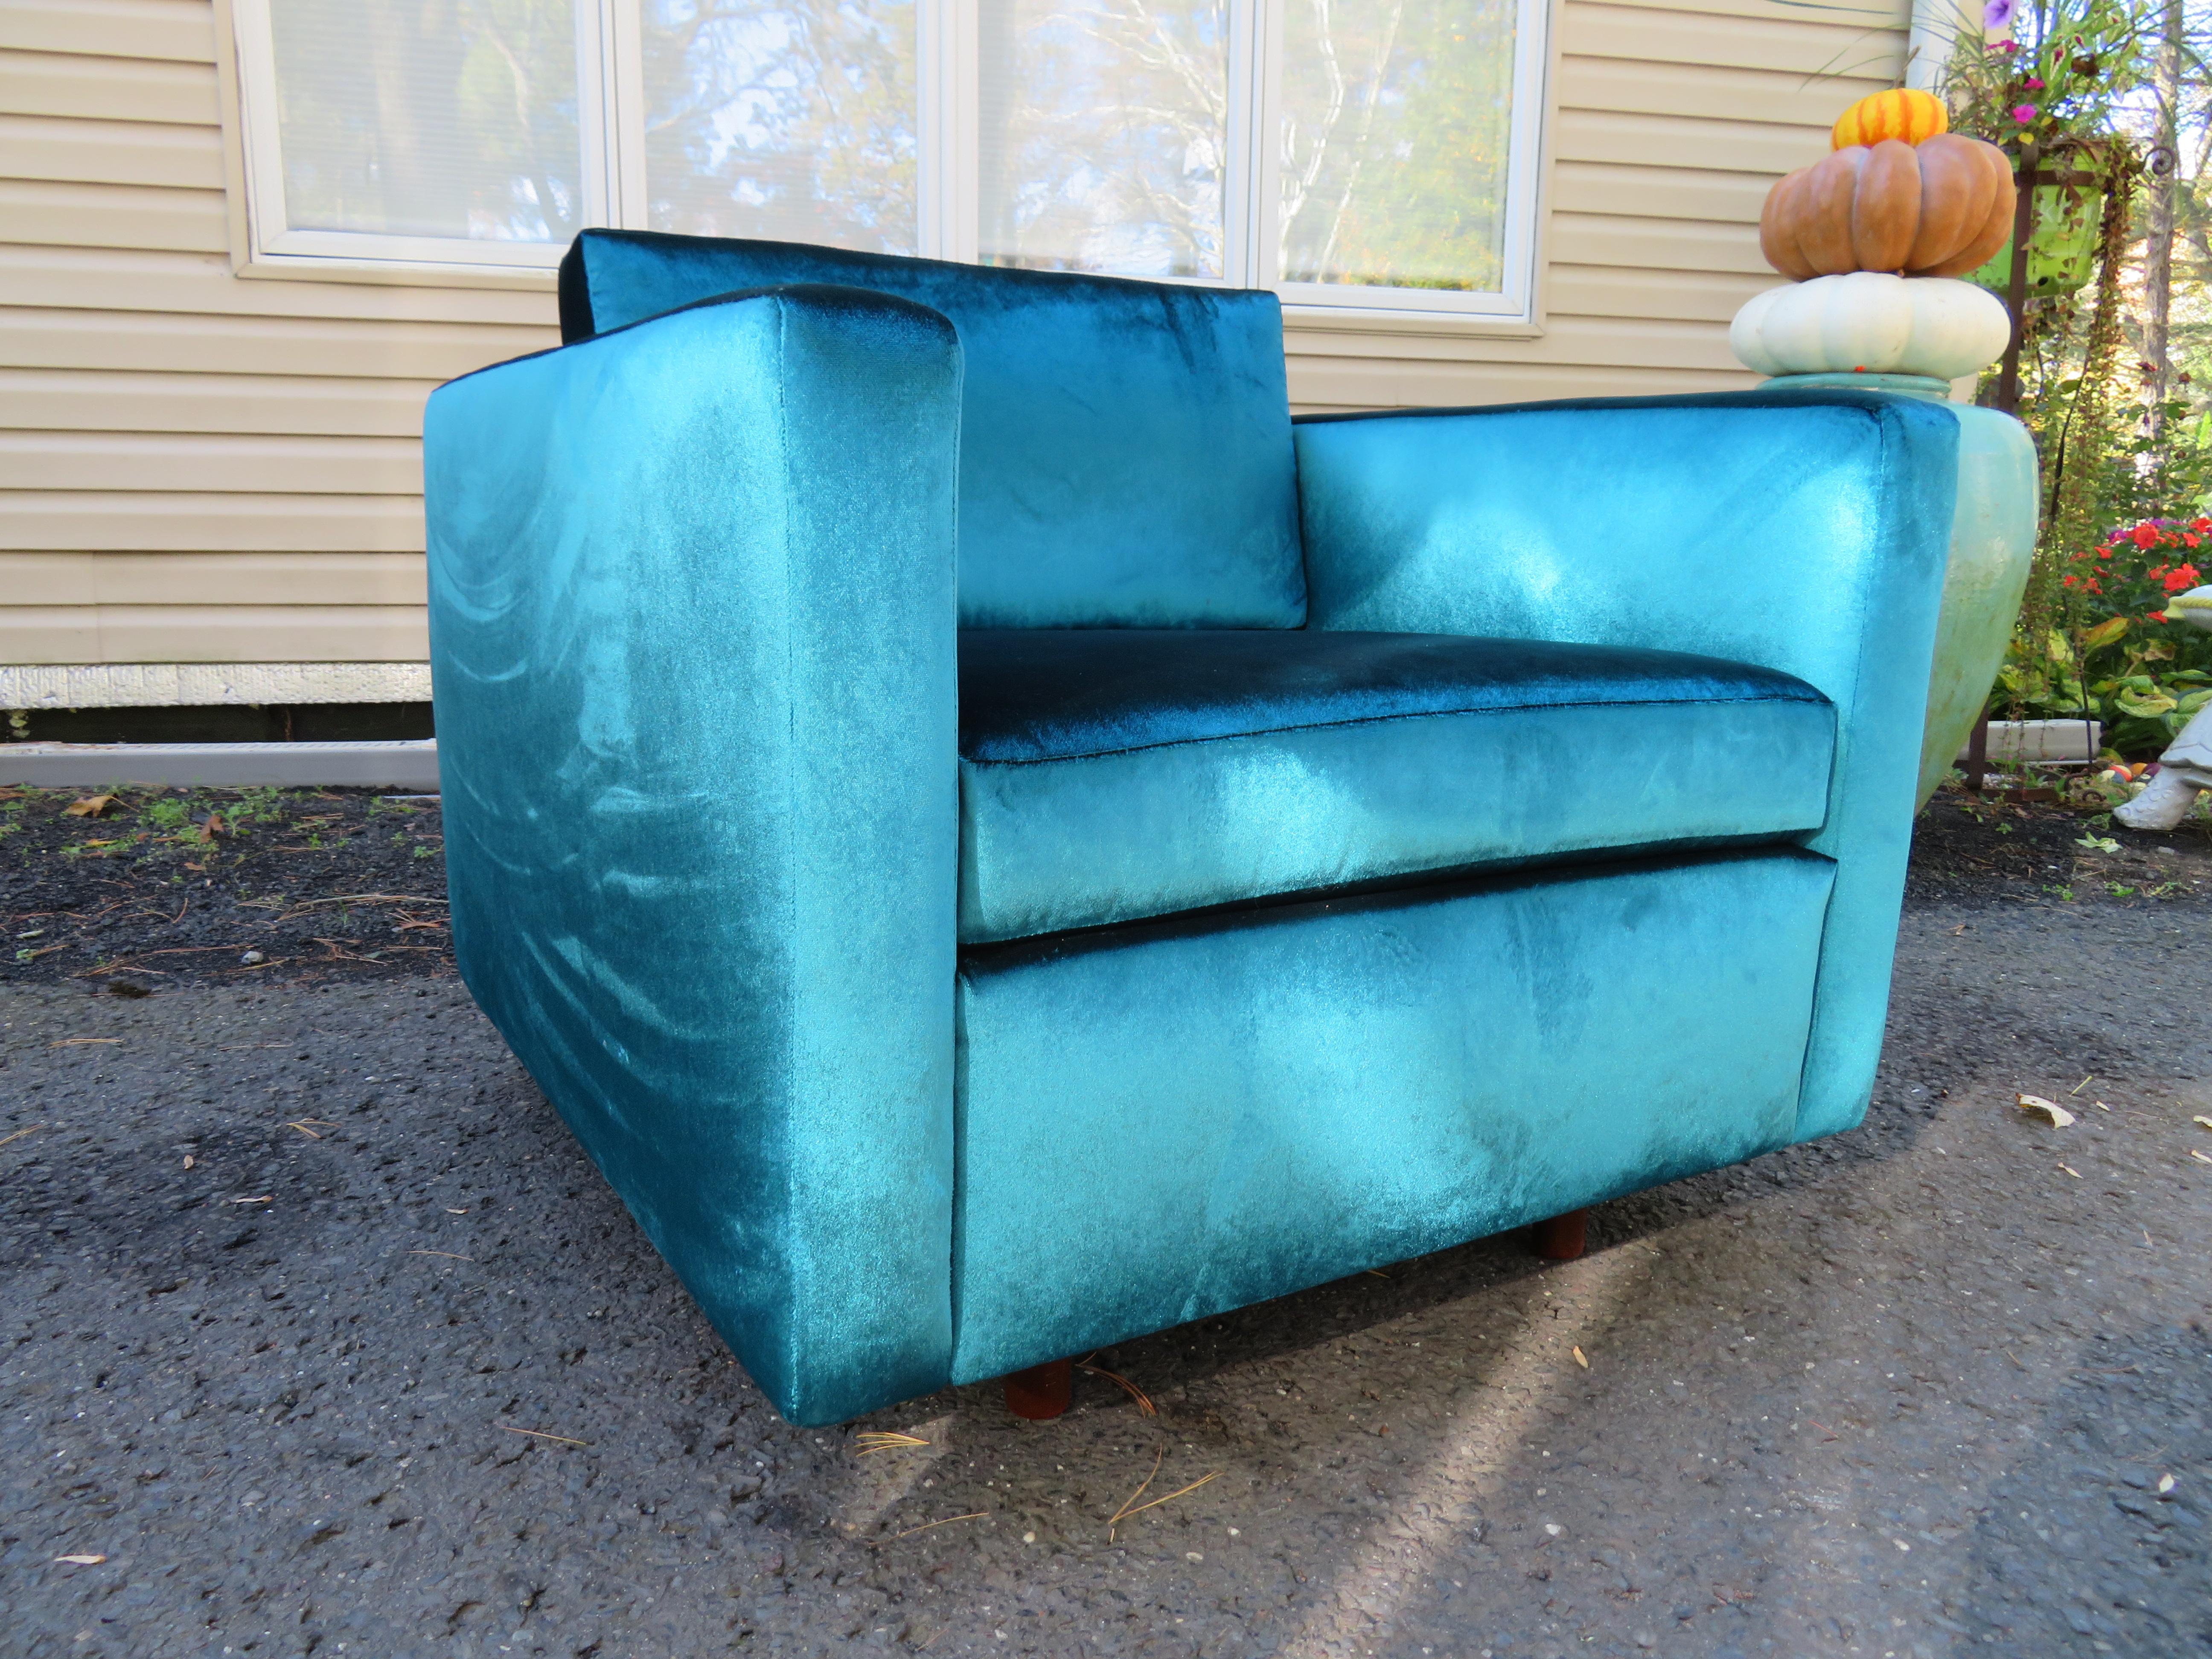 Luscious Harvey Probber style even arm tuxedo lounge chair. This chair has been reupholstered with high-end peacock blue velvet and has all new foam and springs. It is truly stunning in person and is also very comfortable-ready to slip right into